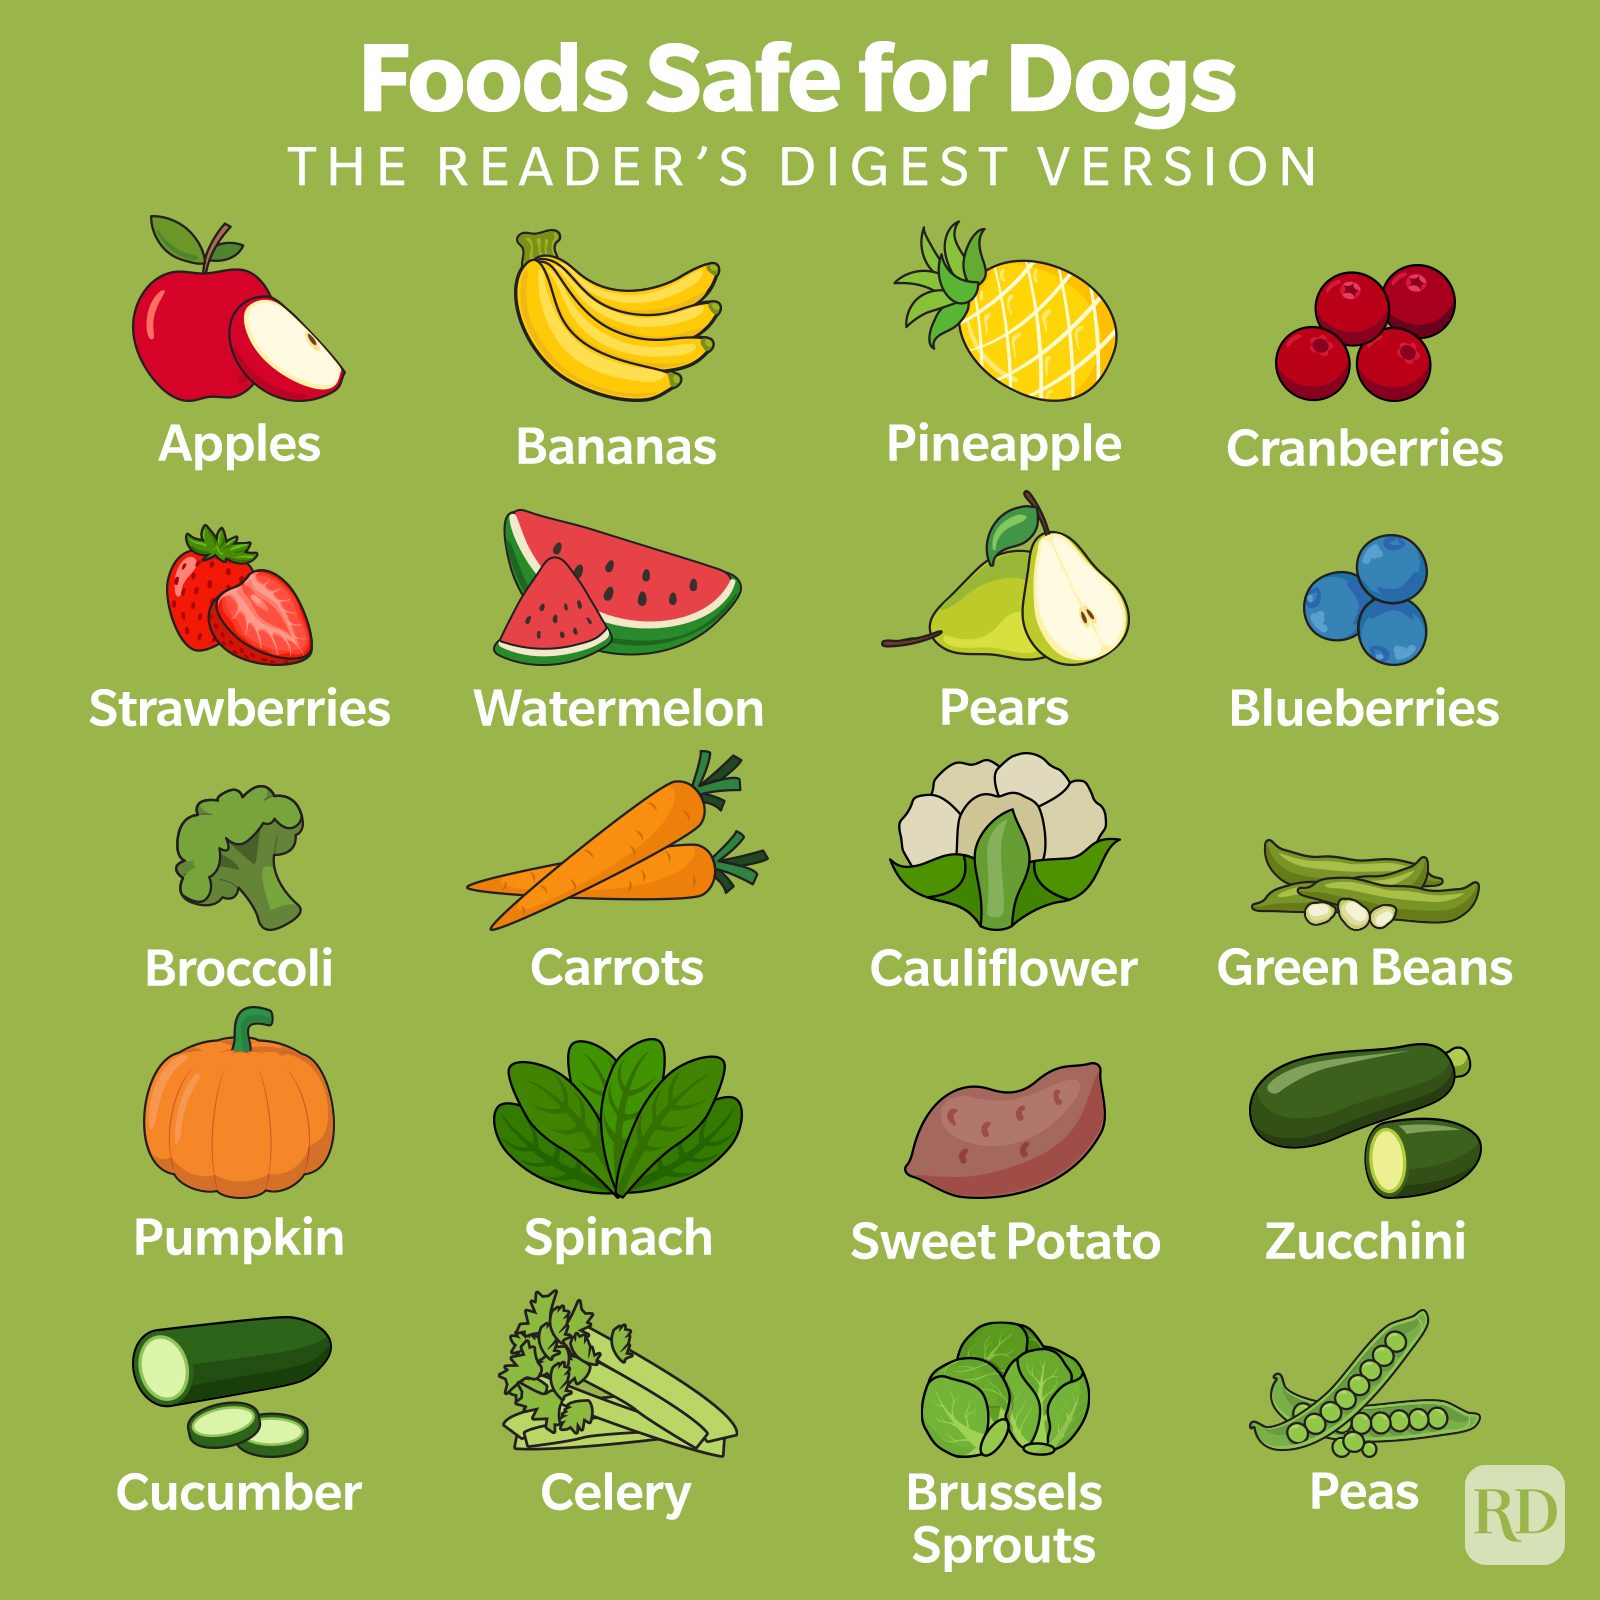 Foods Dogs Can\'t Eat: 12+ Human Foods To Keep Away From Dogs